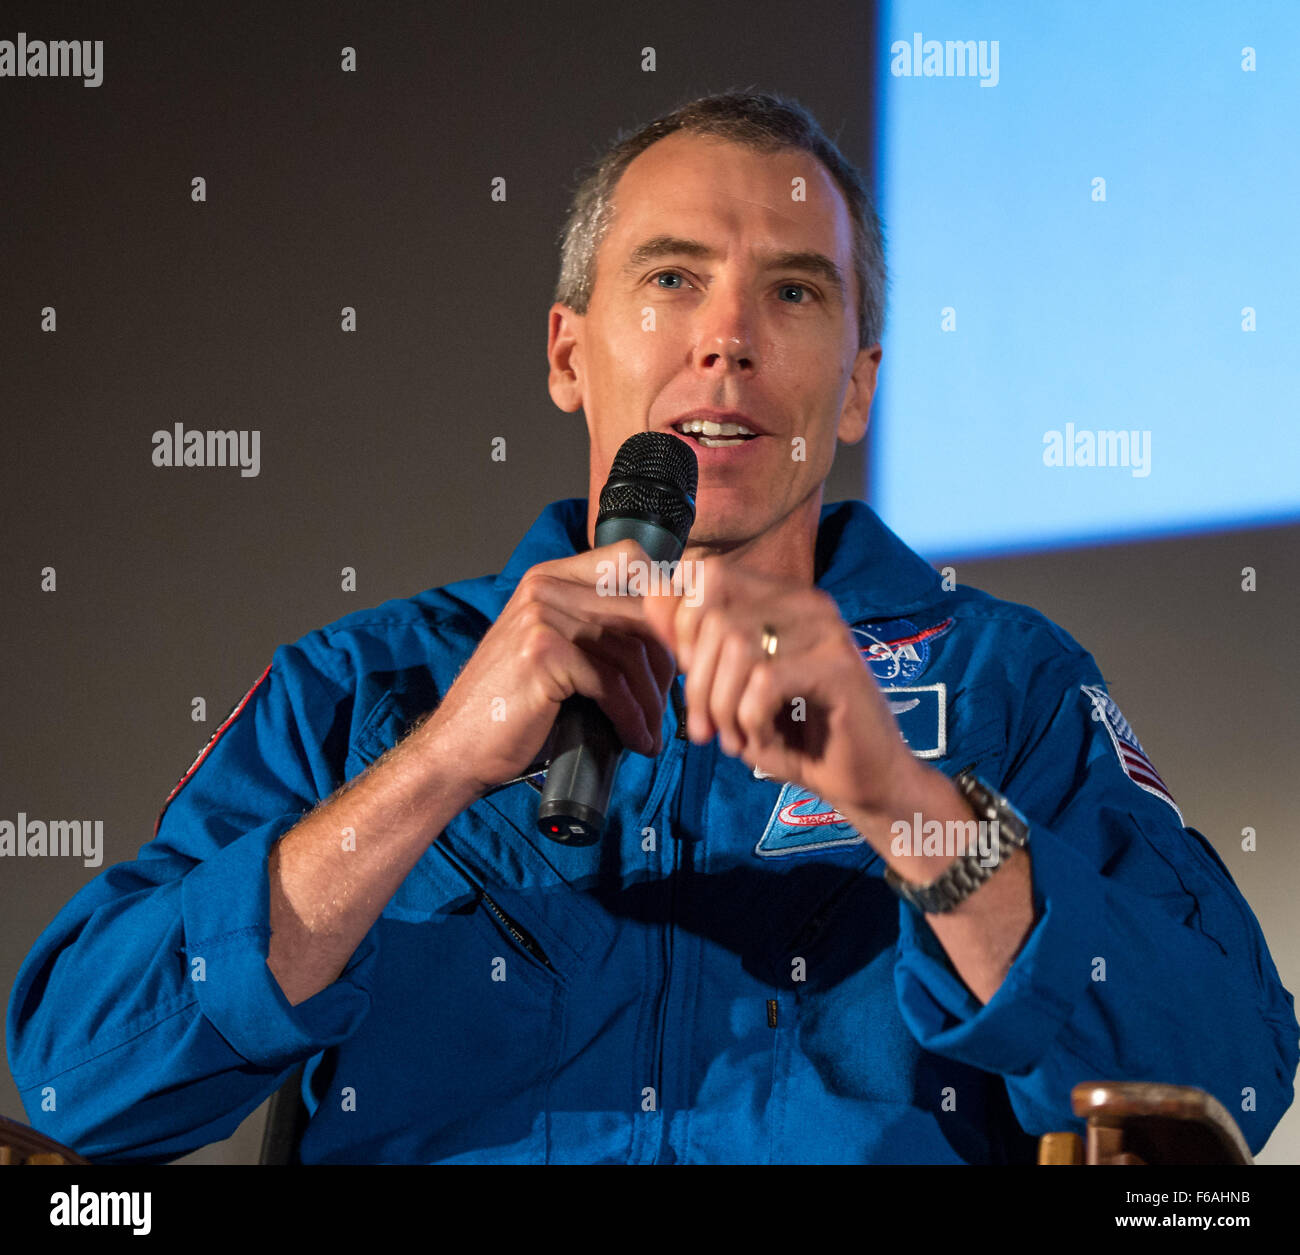 NASA Astronaut Drew Feustel participates in a question and answer session about NASA’s journey to Mars and the film ”The Martian,” Tuesday, Aug. 18, 2015, at the United Artist Theater in La Cañada Flintridge, California. NASA scientists and engineers served as technical consultants on the film. The movie portrays a realistic view of the climate and topography of Mars, based on NASA data, and some of the challenges NASA faces as we prepare for human exploration of the Red Planet in the 2030s. Photo Credit: (NASA/Bill Ingalls) Stock Photo